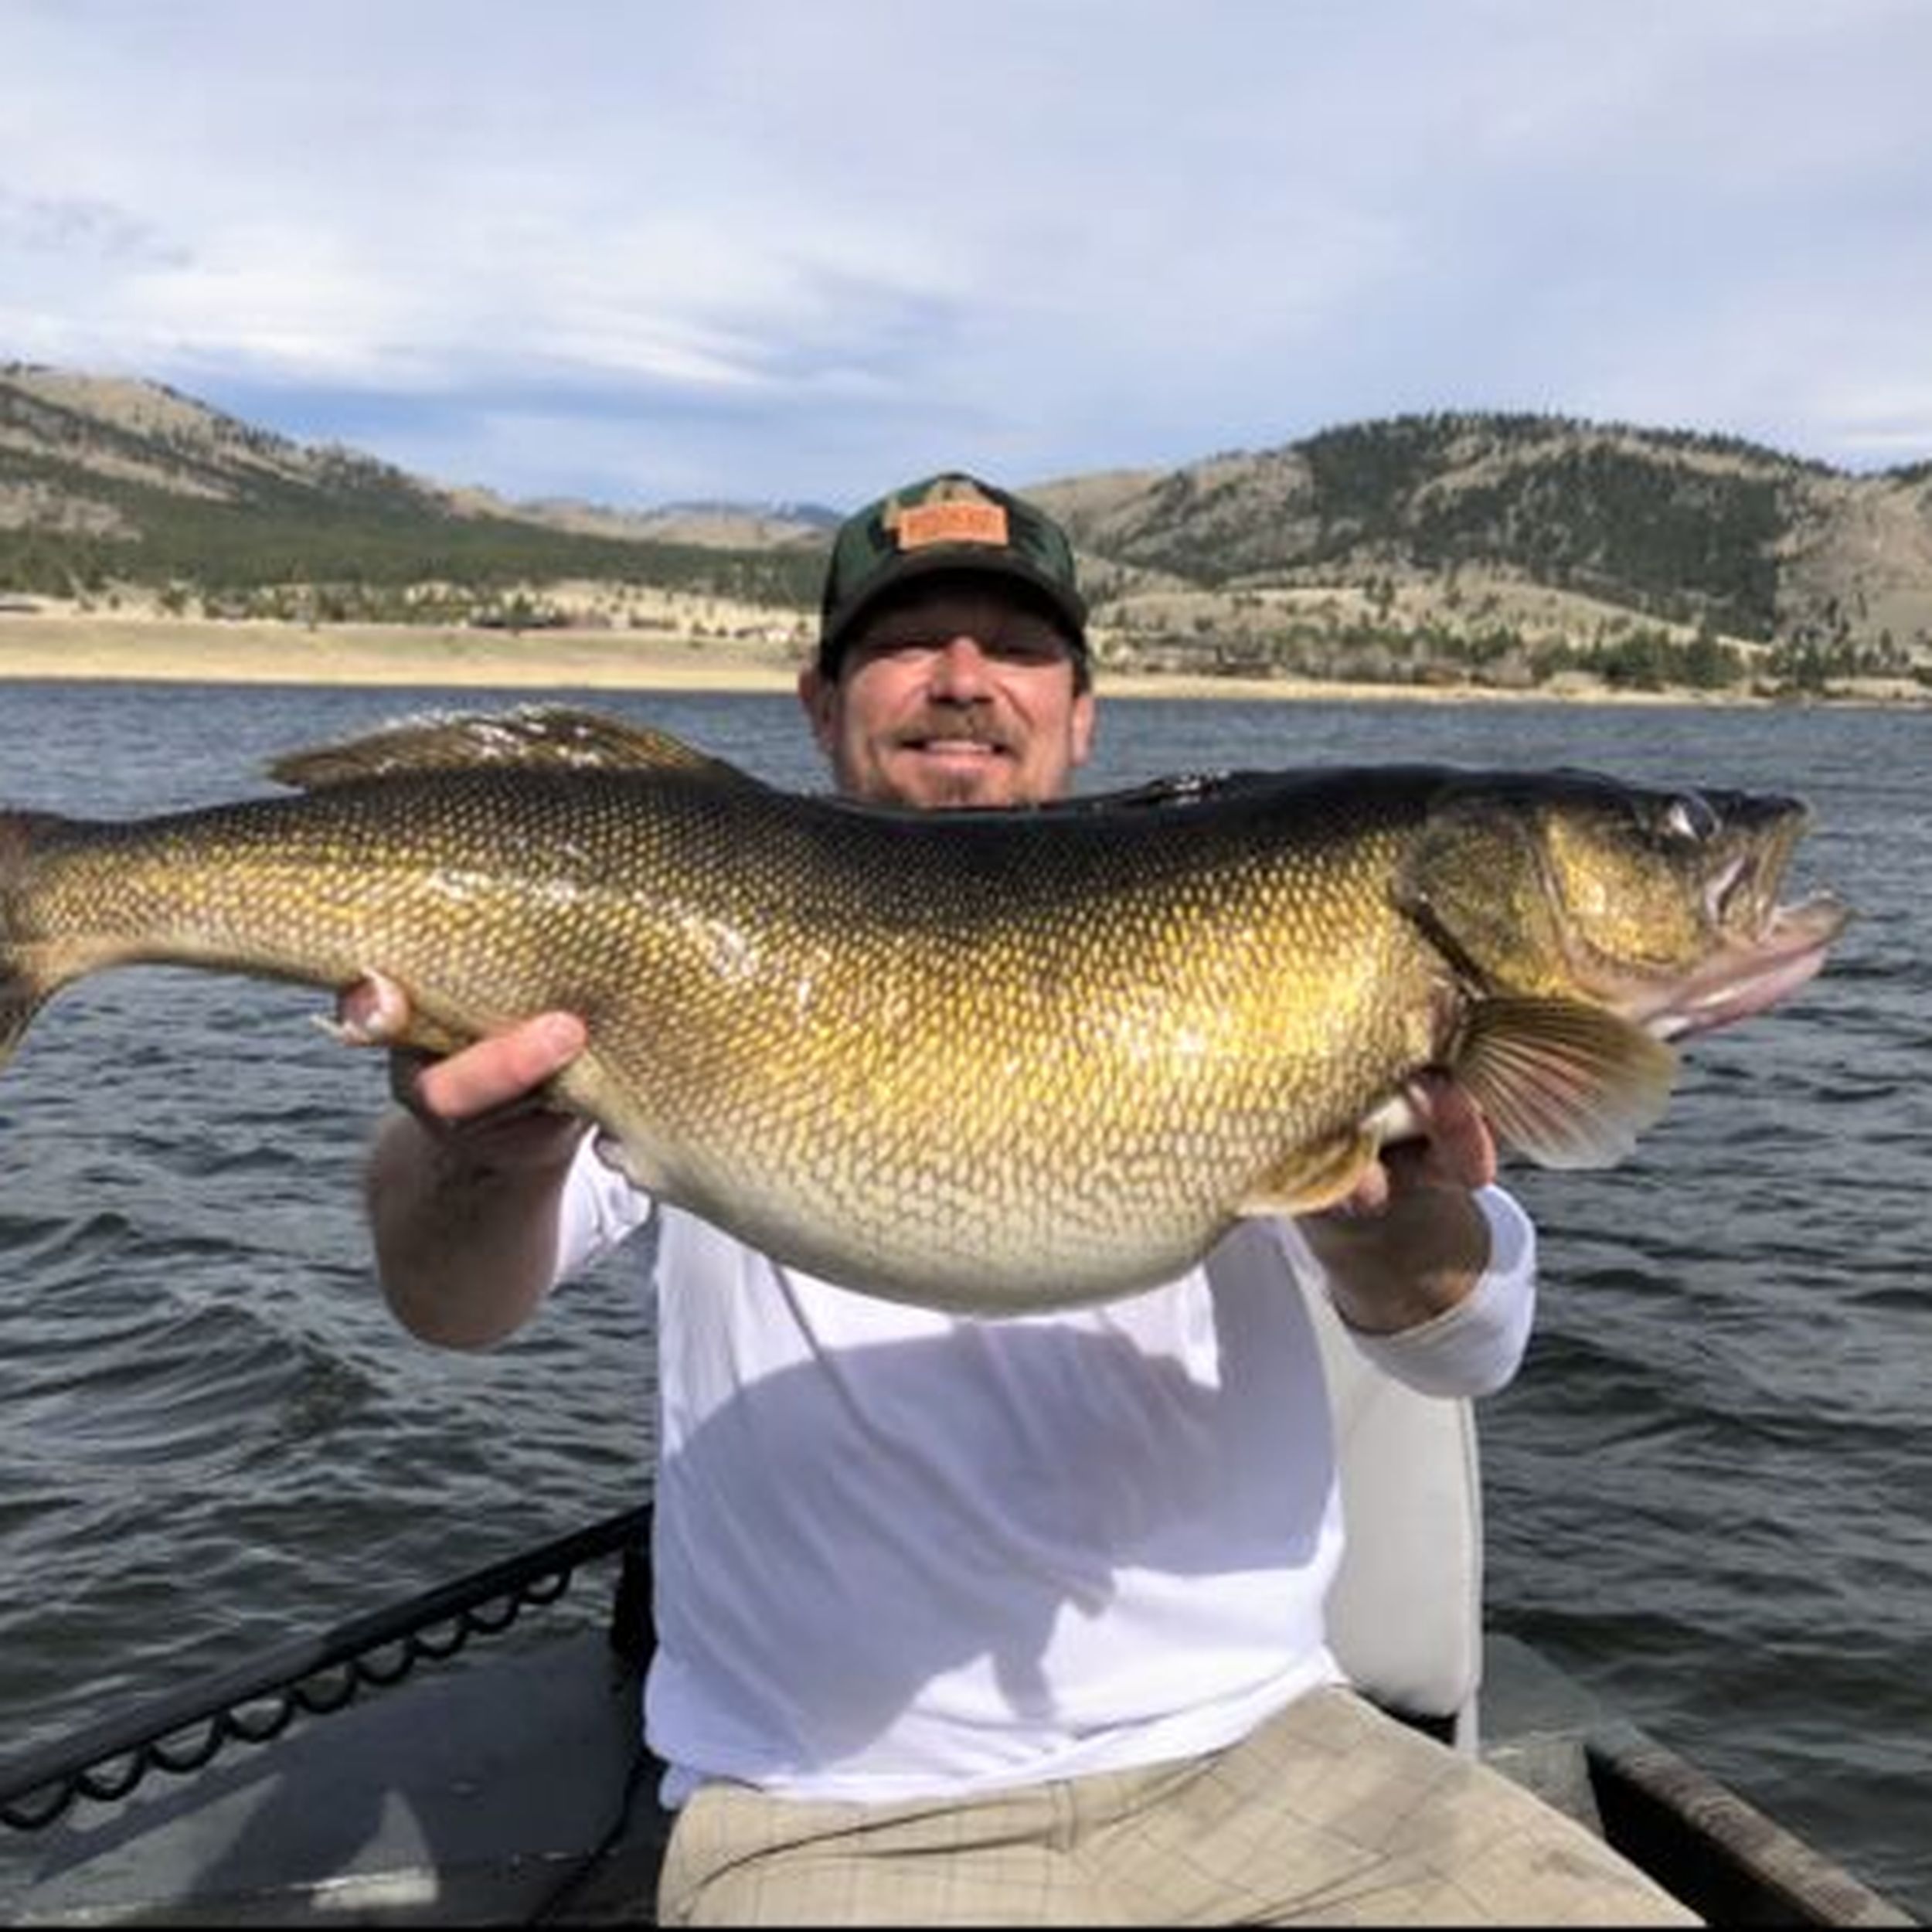 New Montana state record walleye caught, sixth state record fish